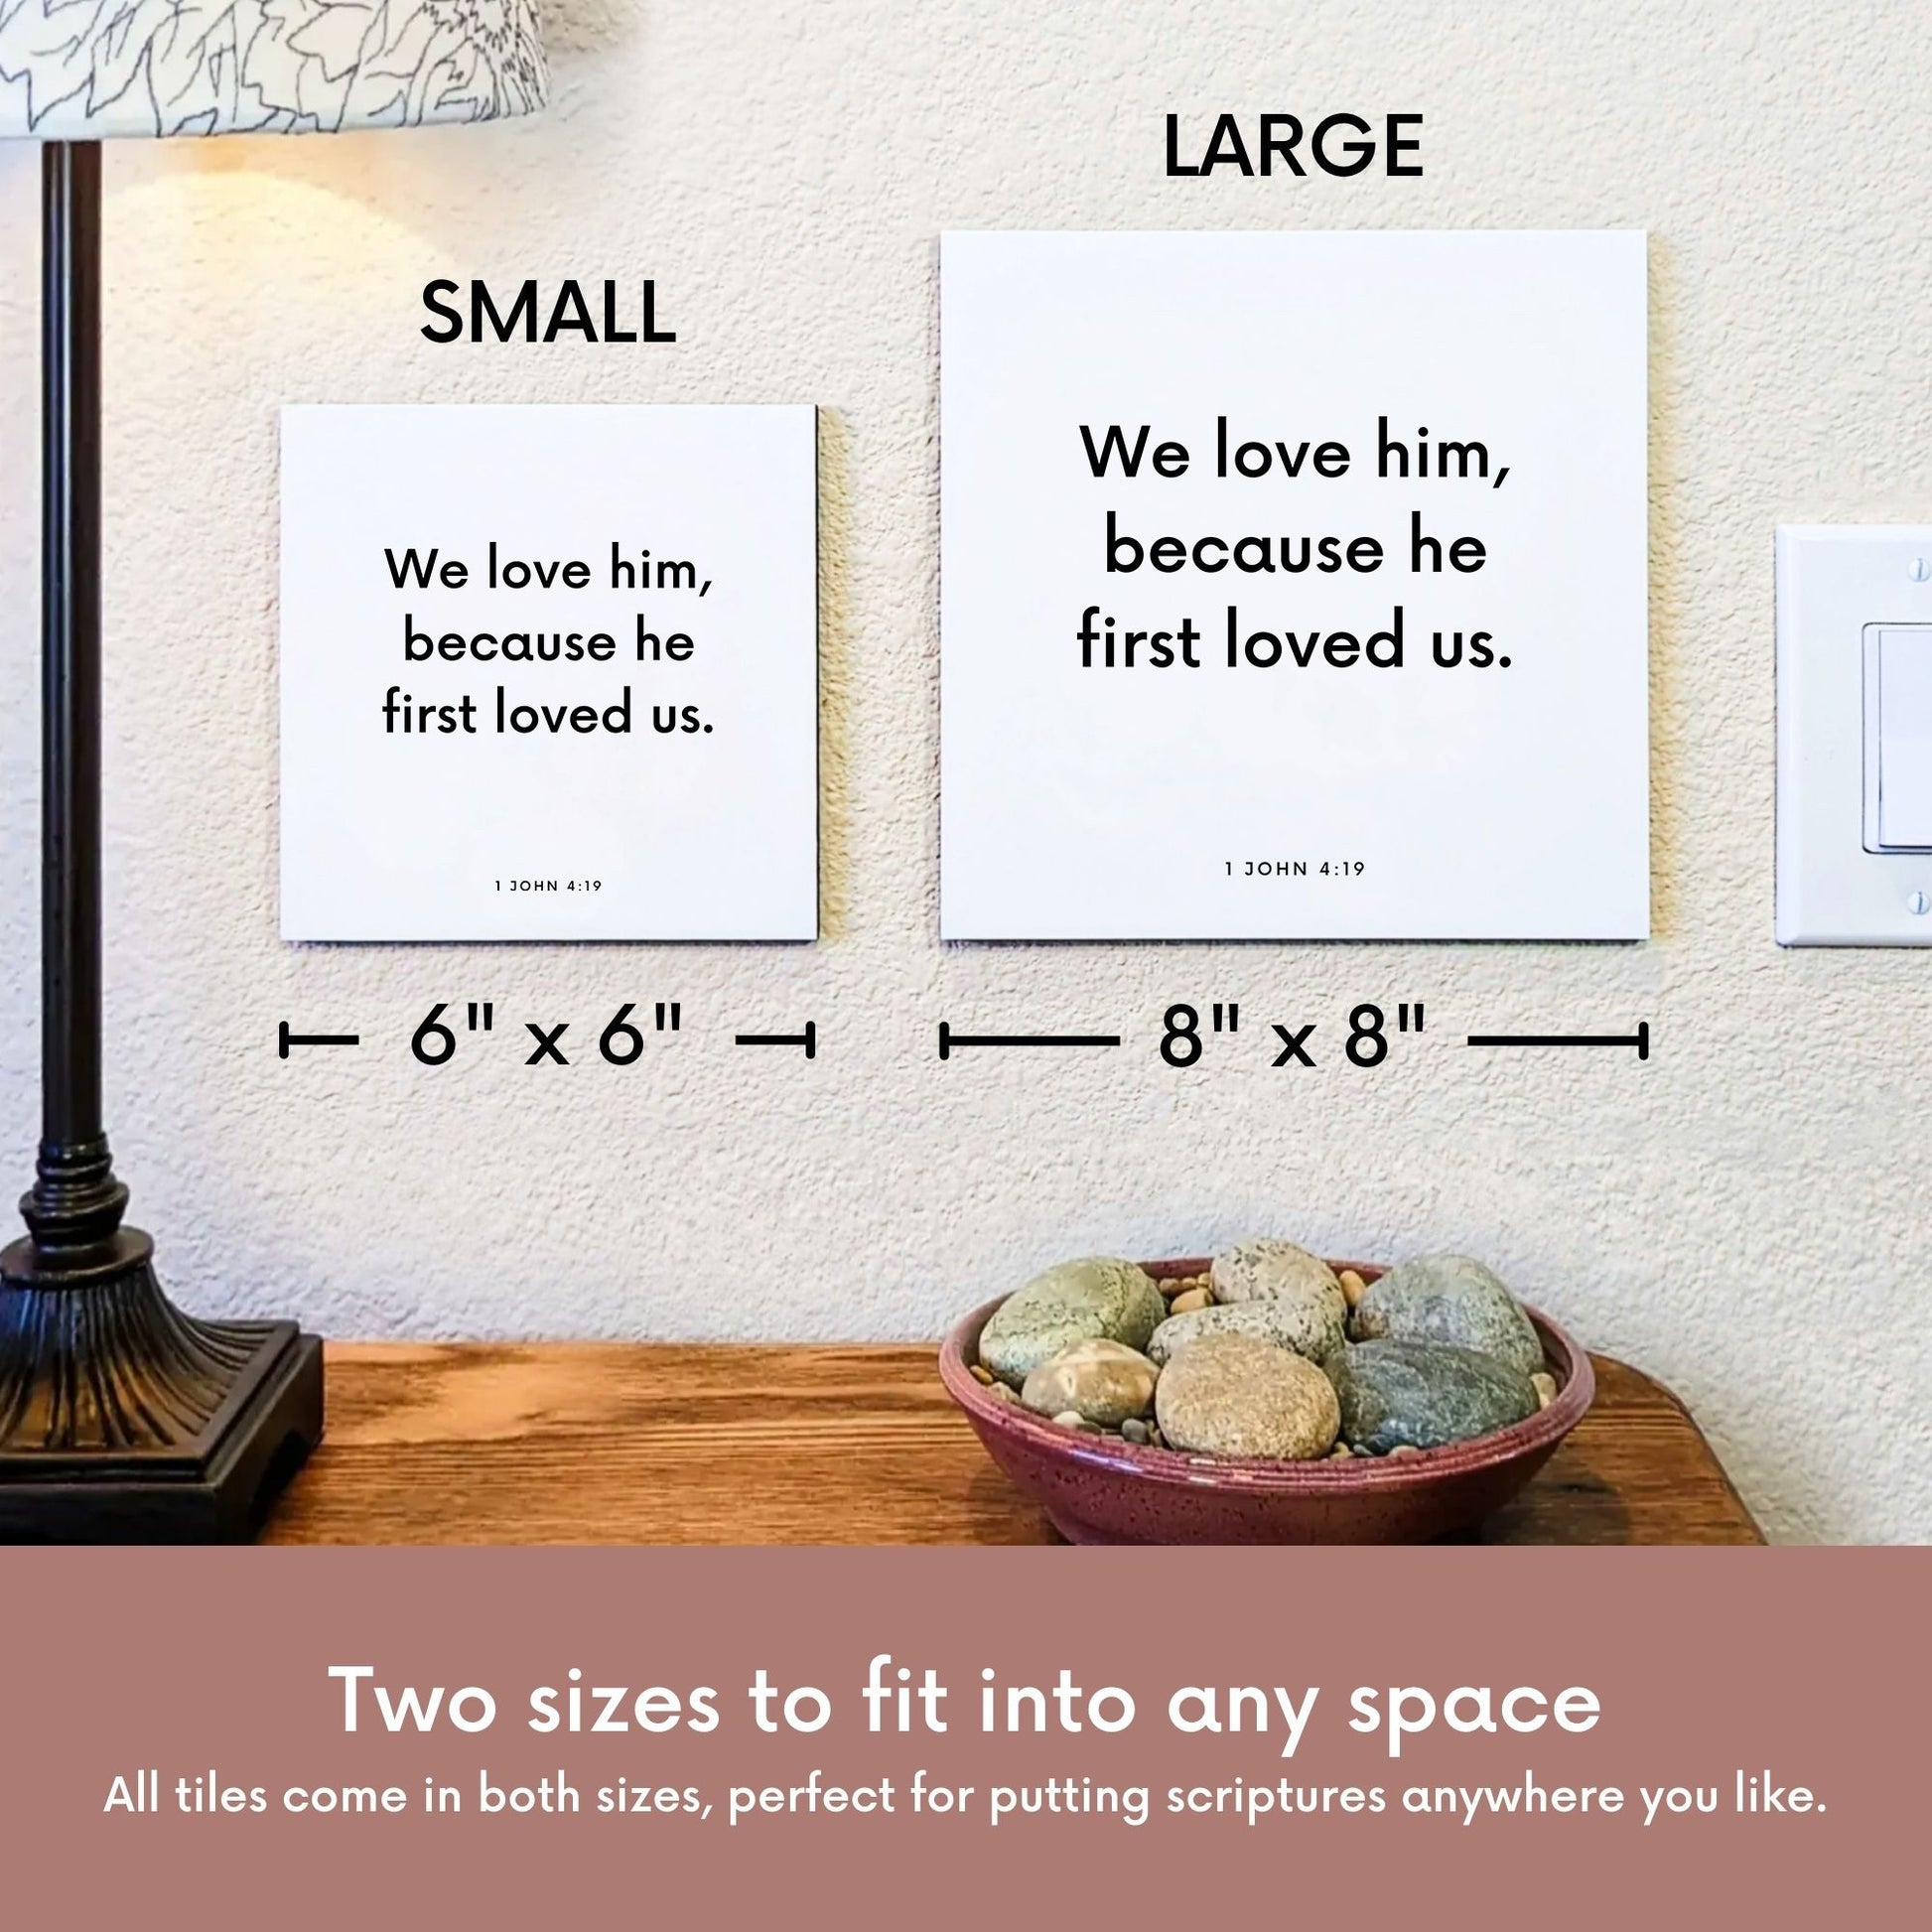 Scripture tile size comparison for 1 John 4:19 - "We love him, because he first loved us"